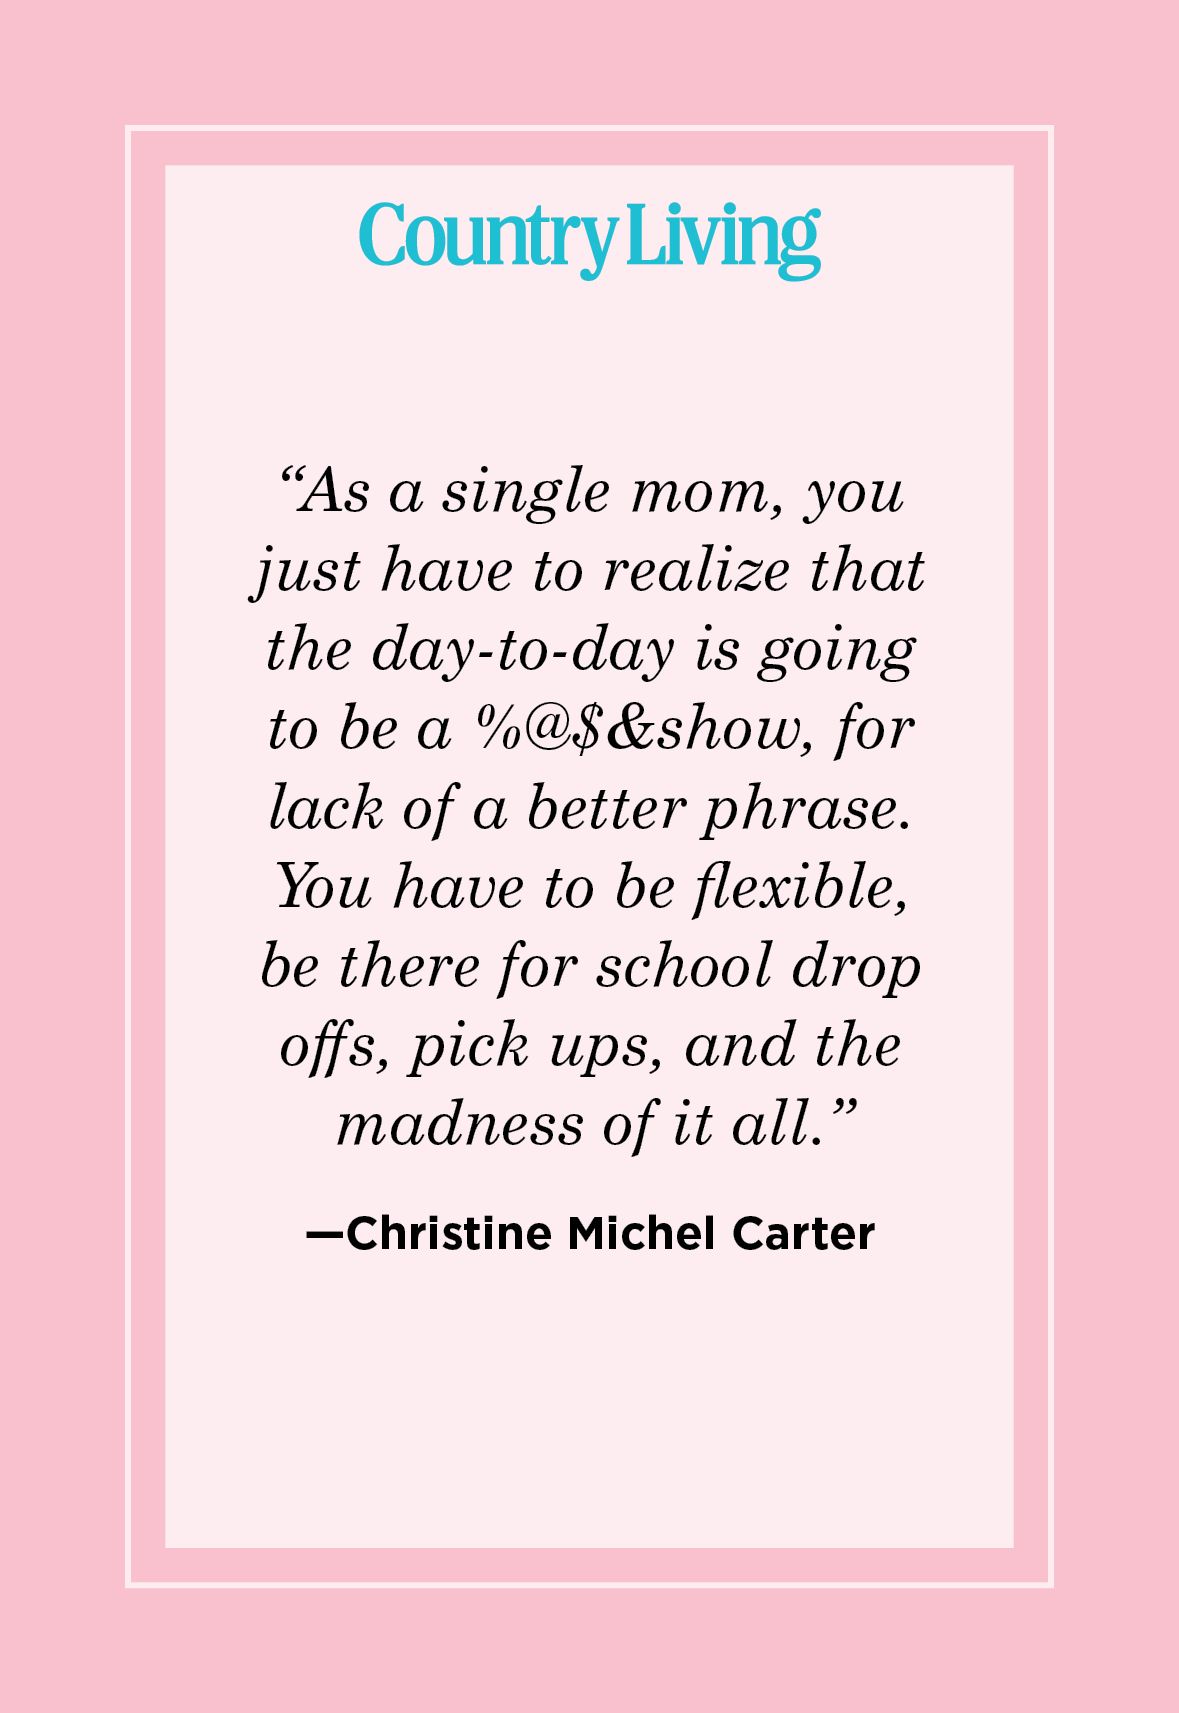 100 Mother's Day Quotes To Show Your Love - Parade